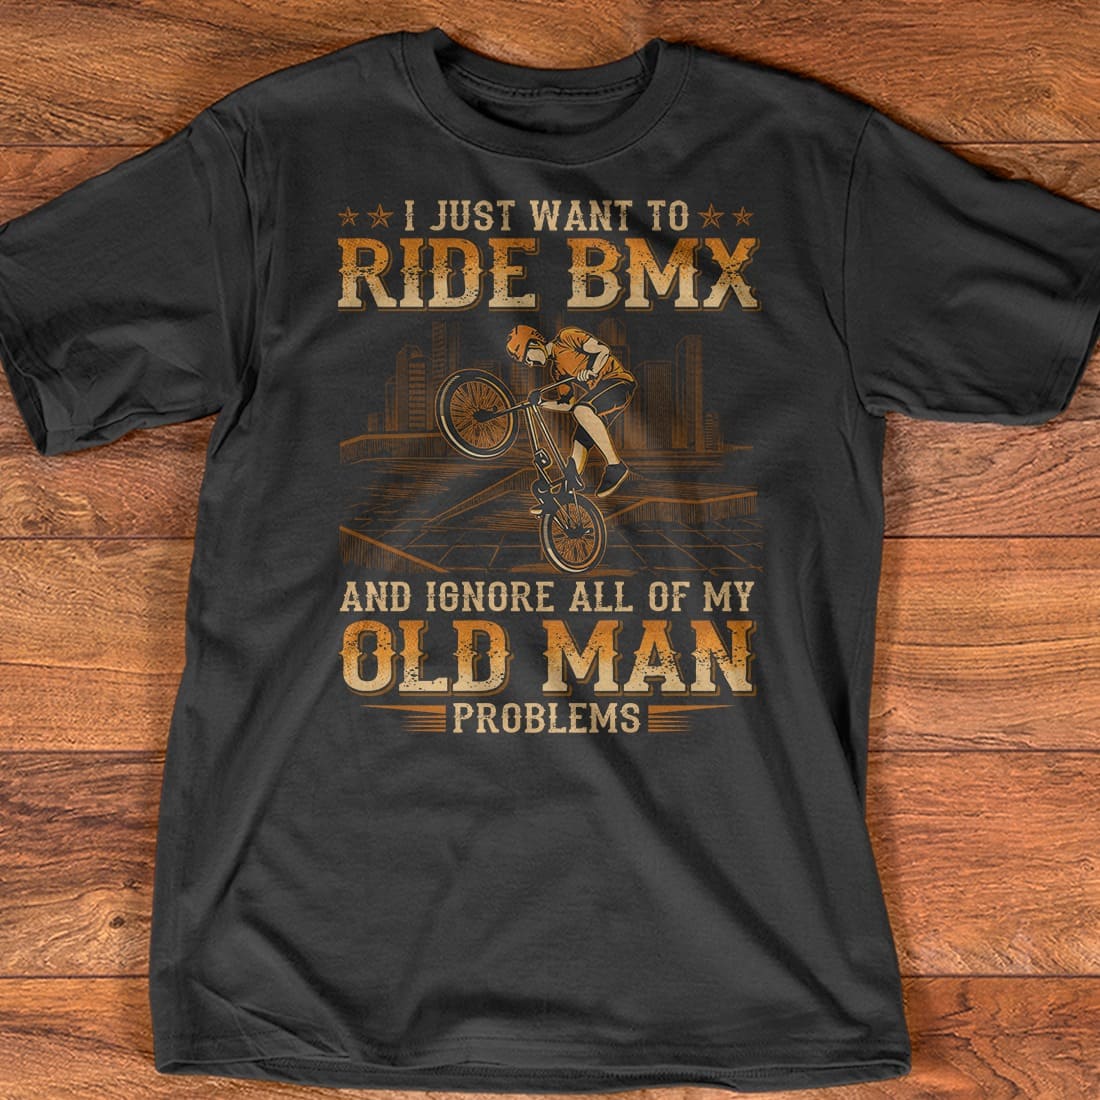 I just want to ride BMX and ignore all of old man problems - BMX bike lover, gift for bikers